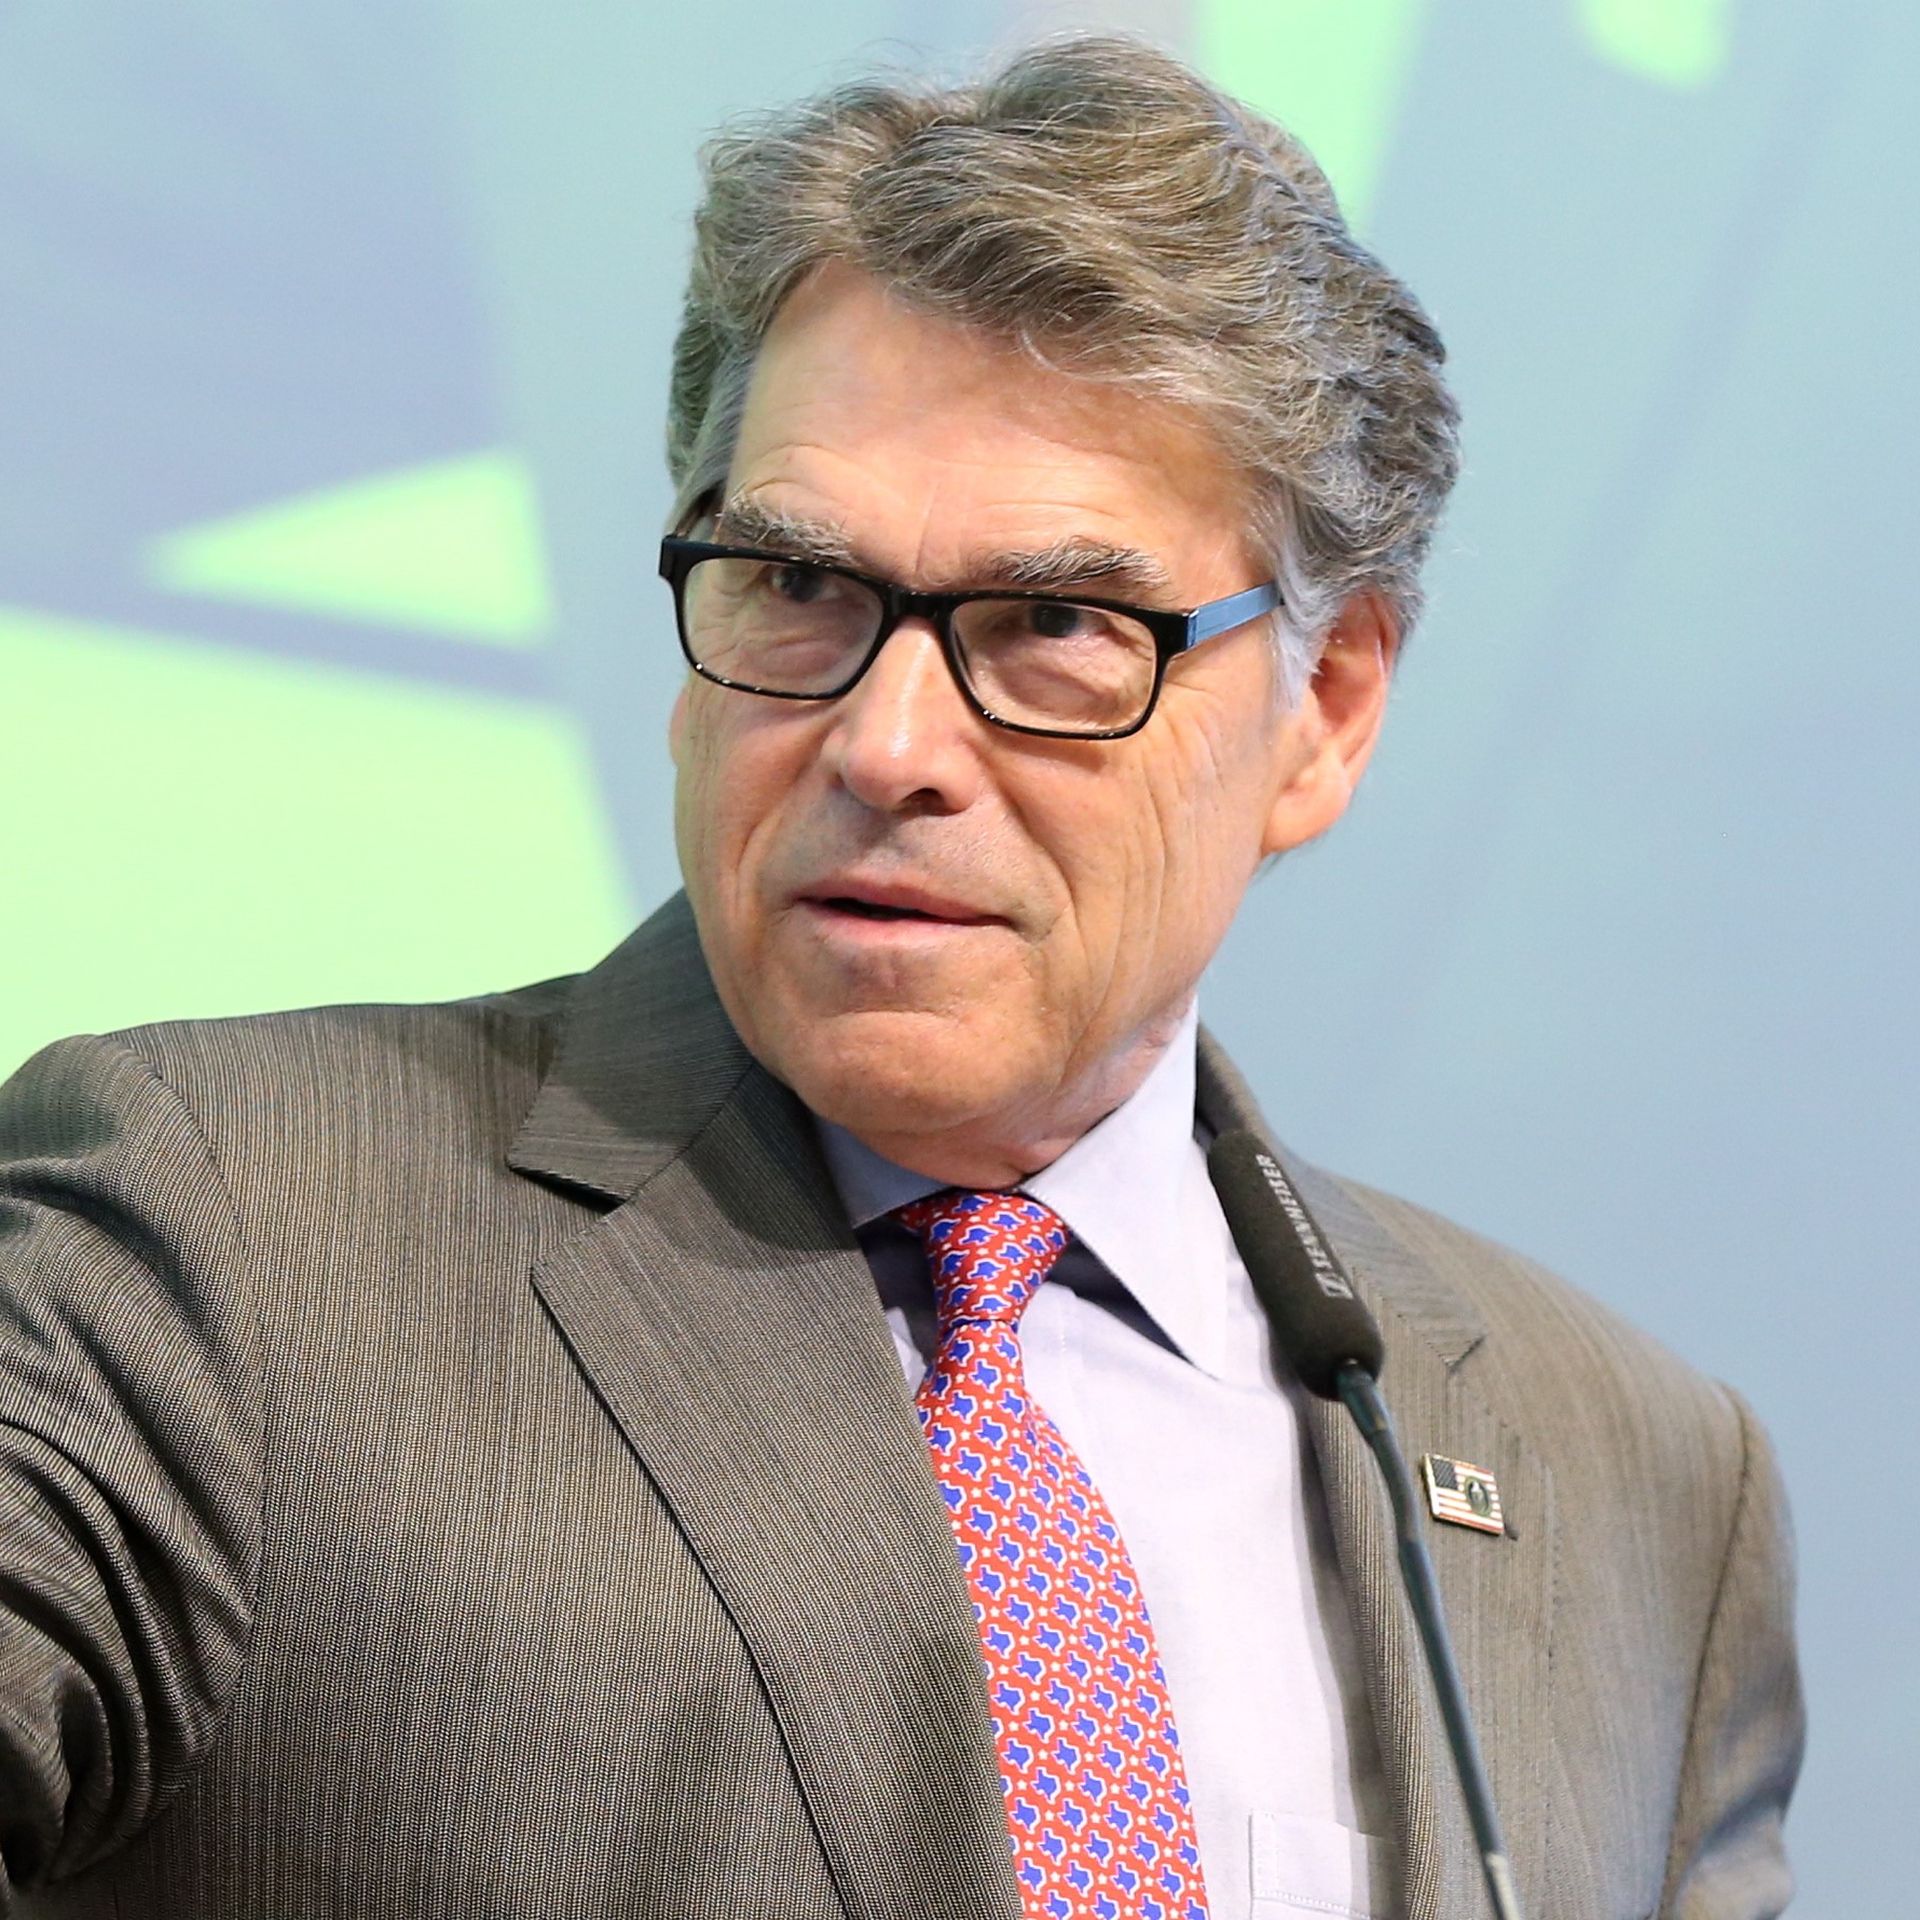 Rick Perry speaking at an event